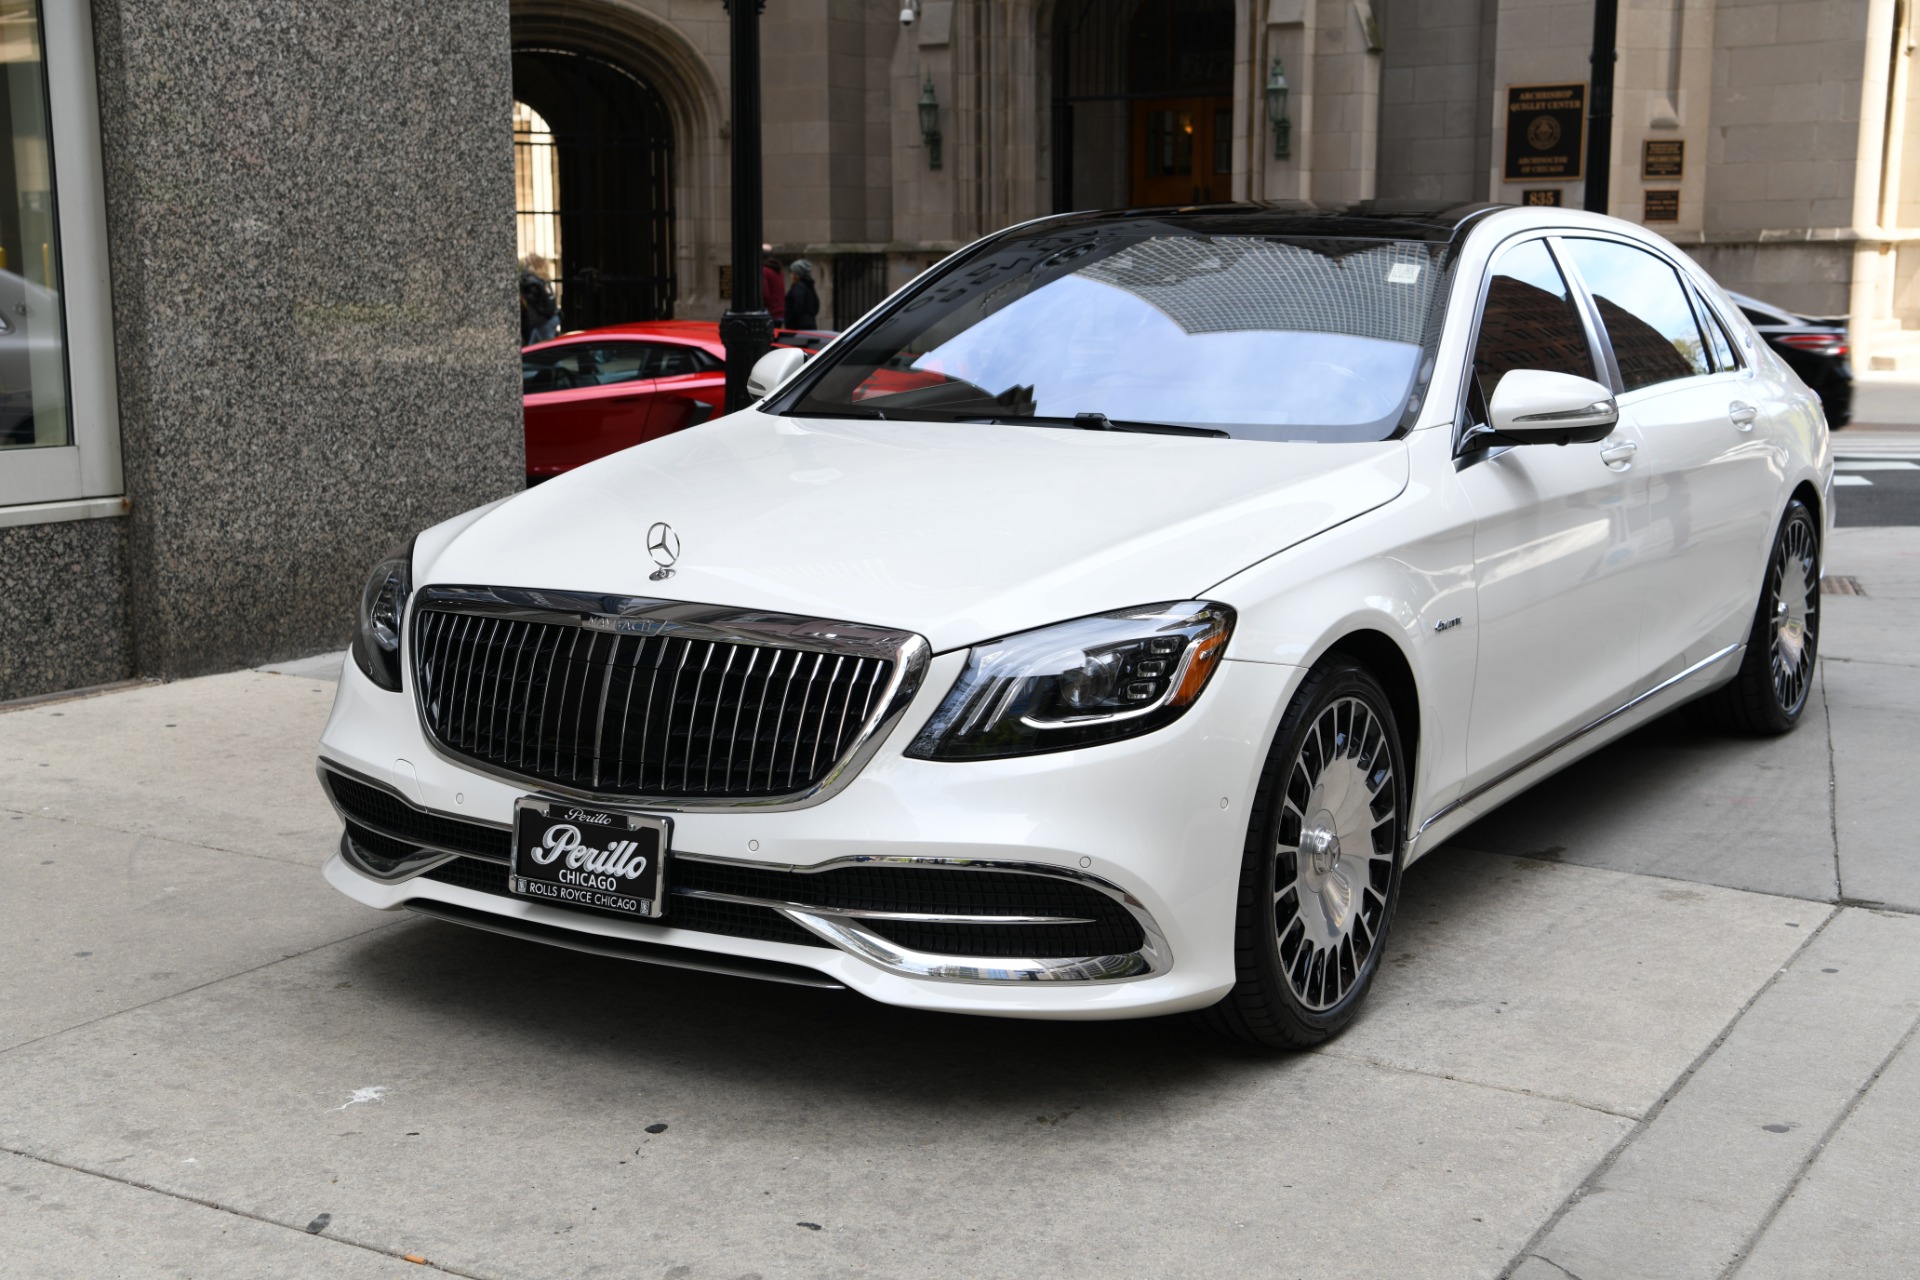 2020 Mercedes-Benz S-Class Mercedes-Maybach S 560 4MATIC Stock # GC3237 for  sale near Chicago, IL | IL Mercedes-Benz Dealer